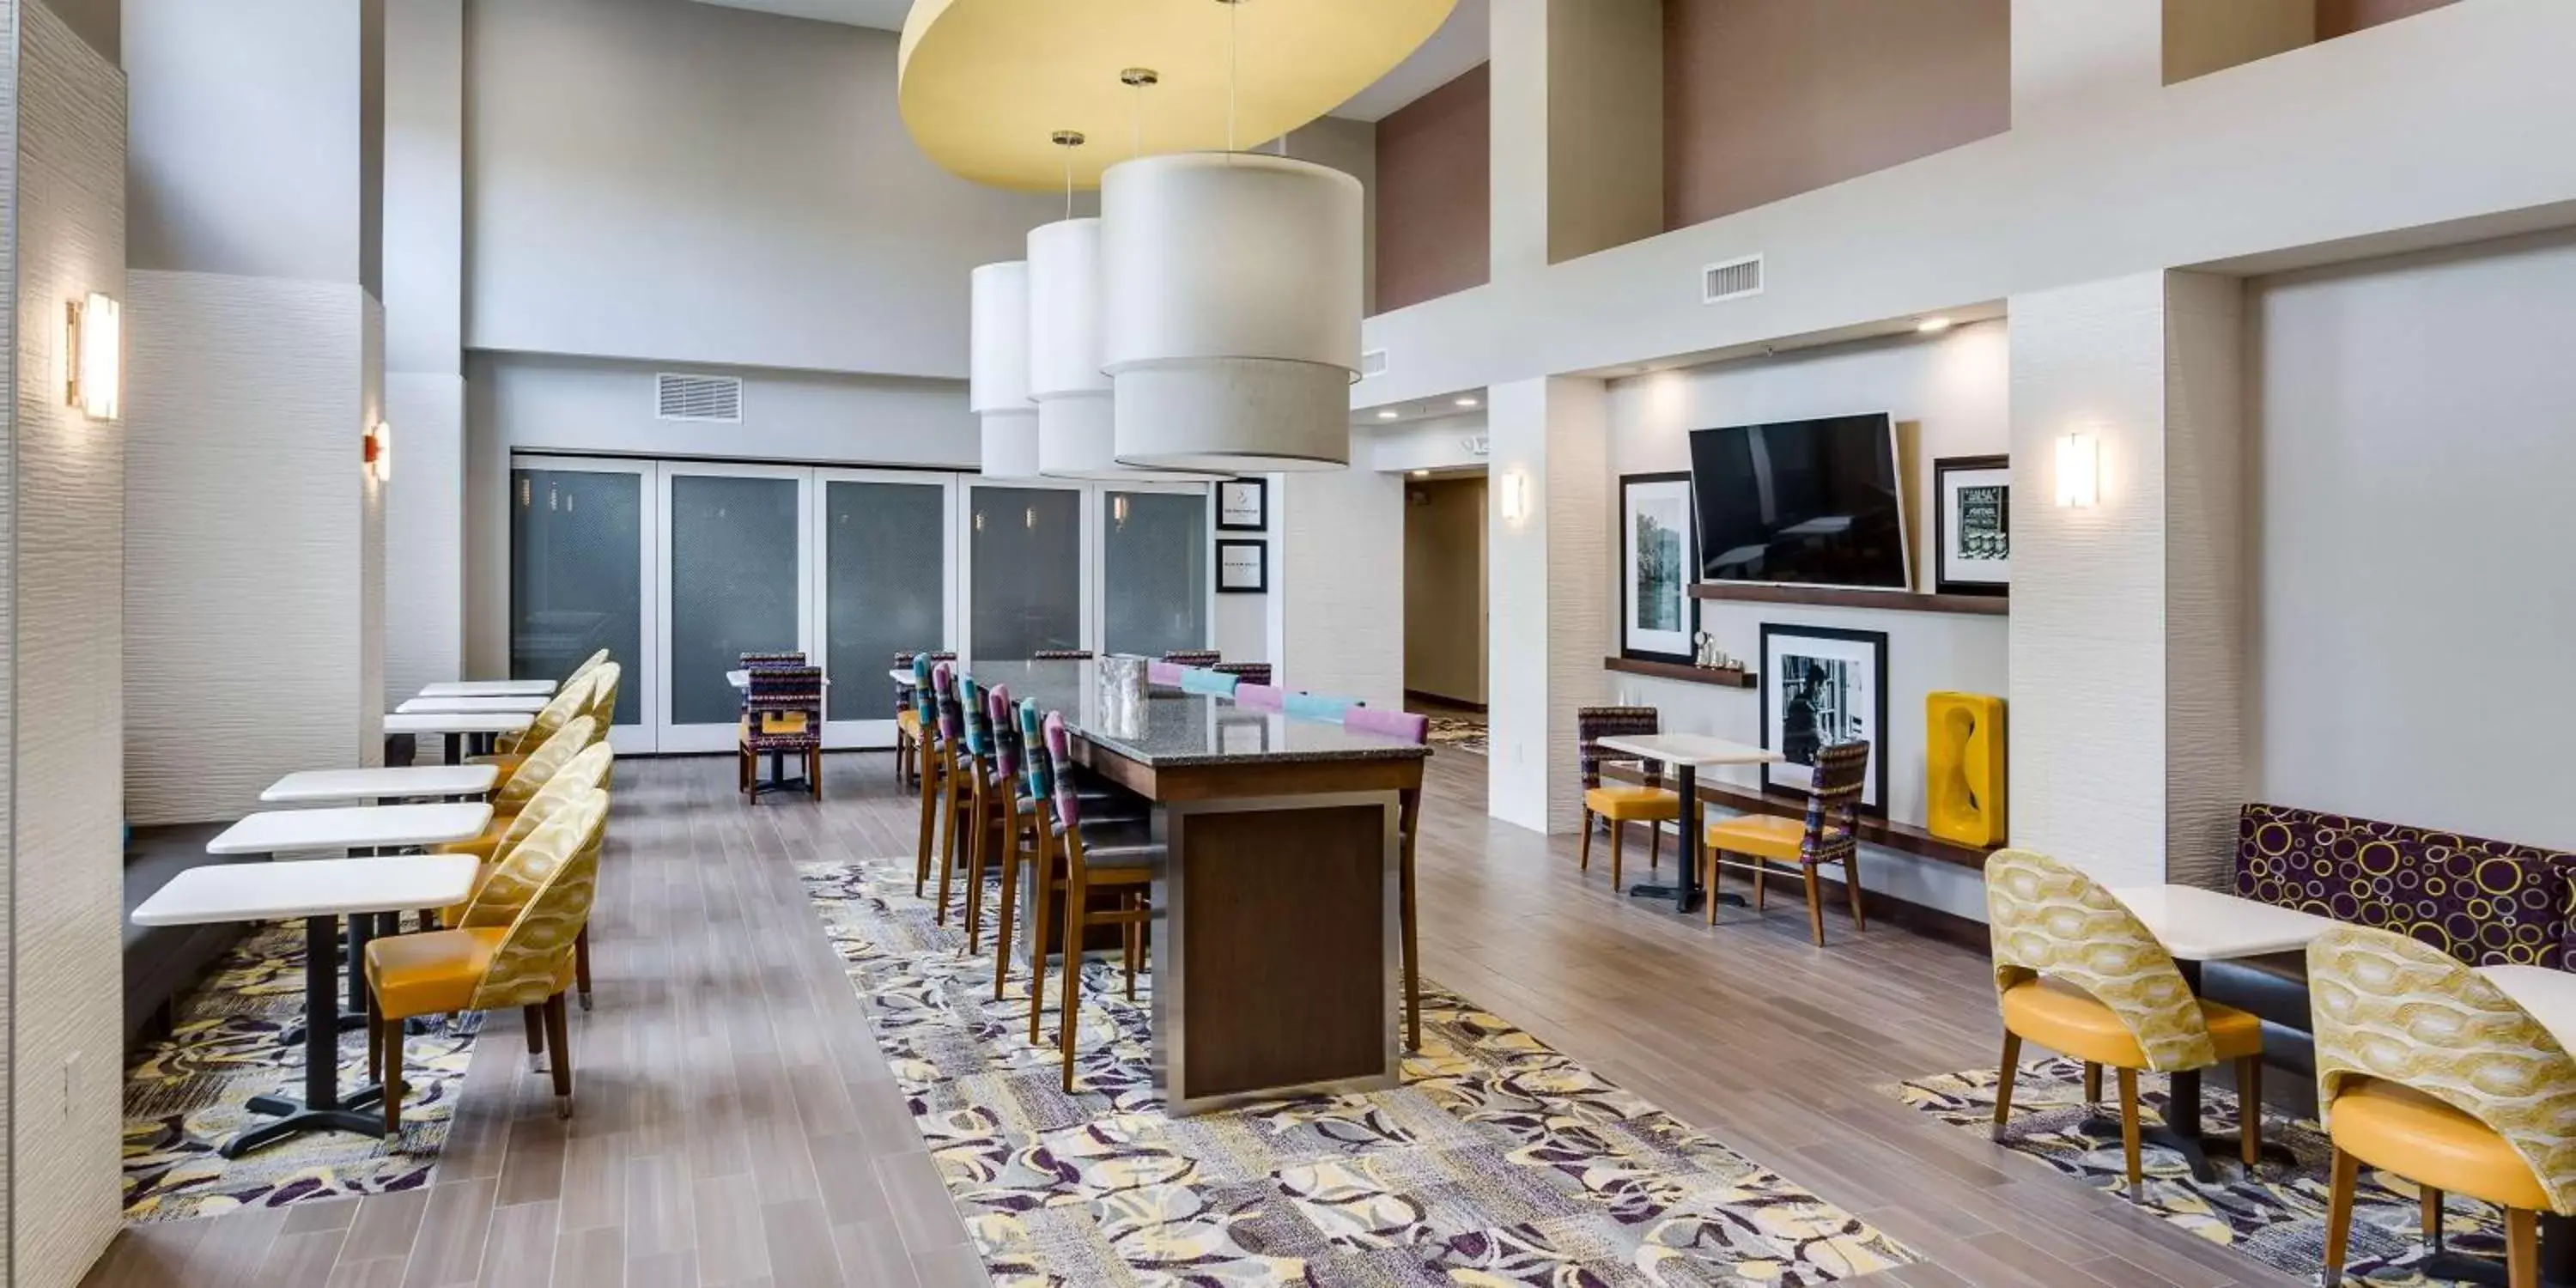 Dining area in Hampton Inn & Suites - Knoxville Papermill Drive, TN